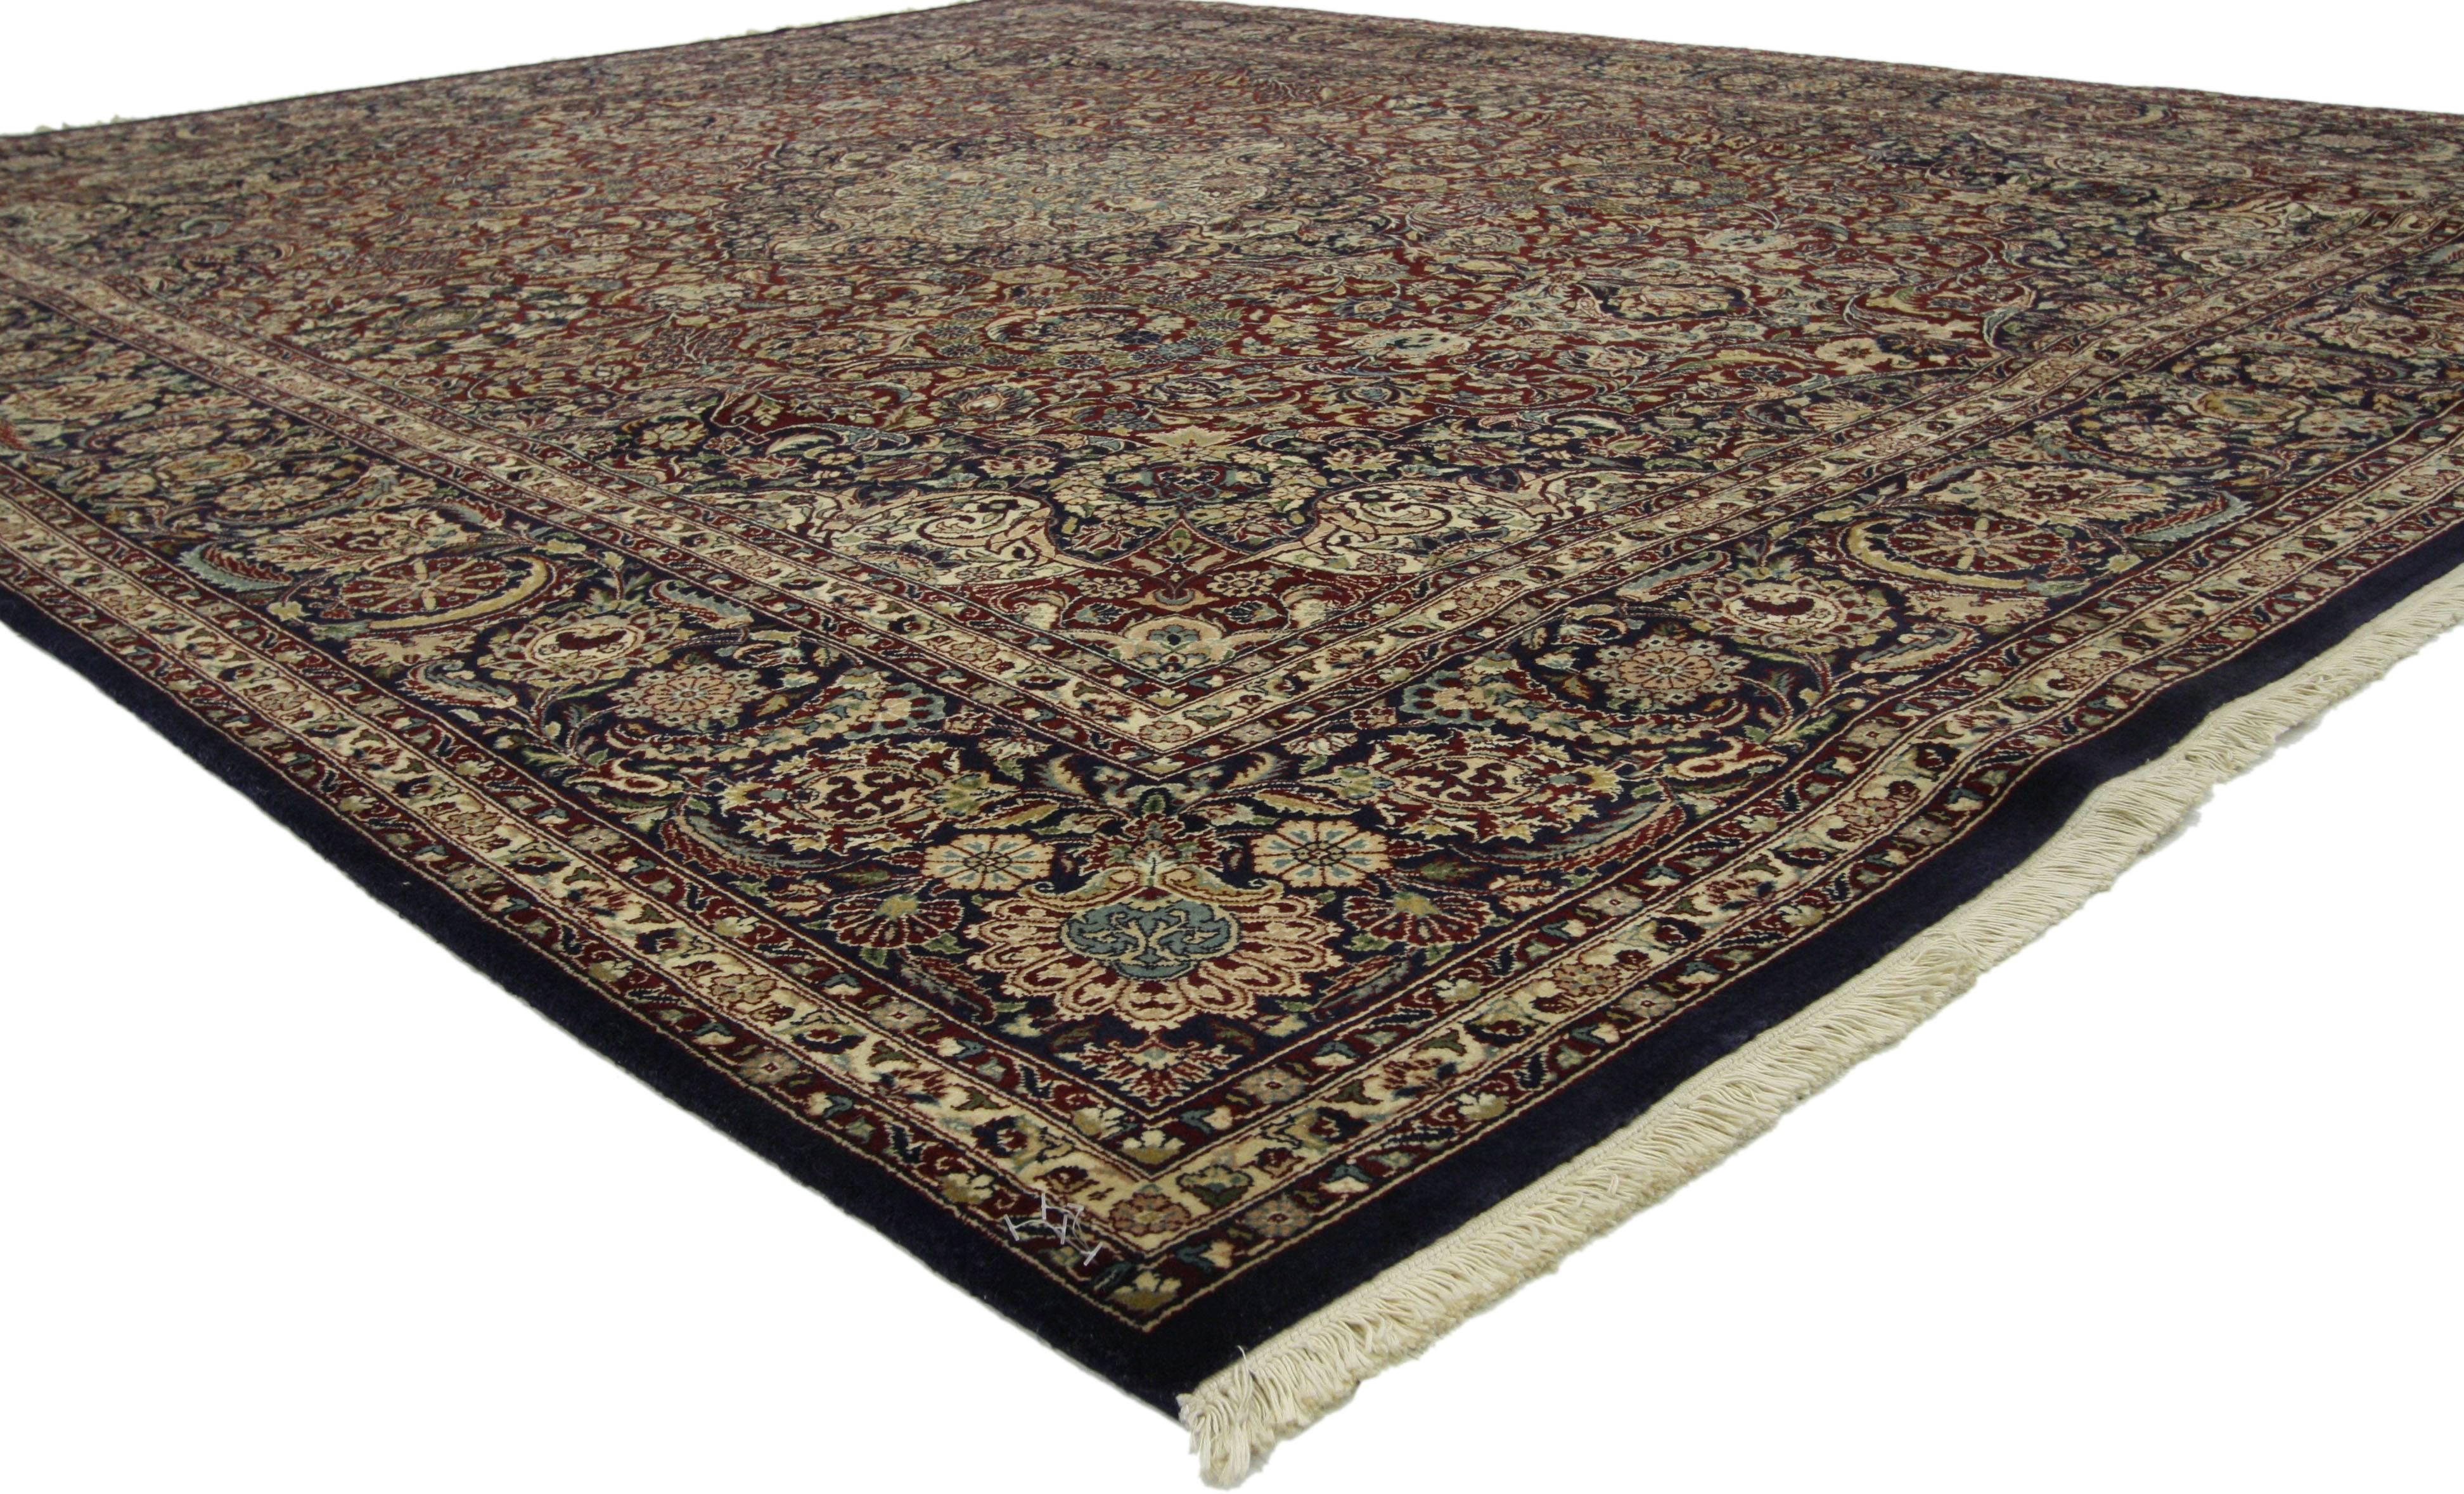 73491, vintage Pakistani Persian style rug with all over floral motif. This traditional Persian style rug features an intricate floral medallion floating in a frenzied garden of feathered wreaths, lush palmettes, stylized floral roundels and